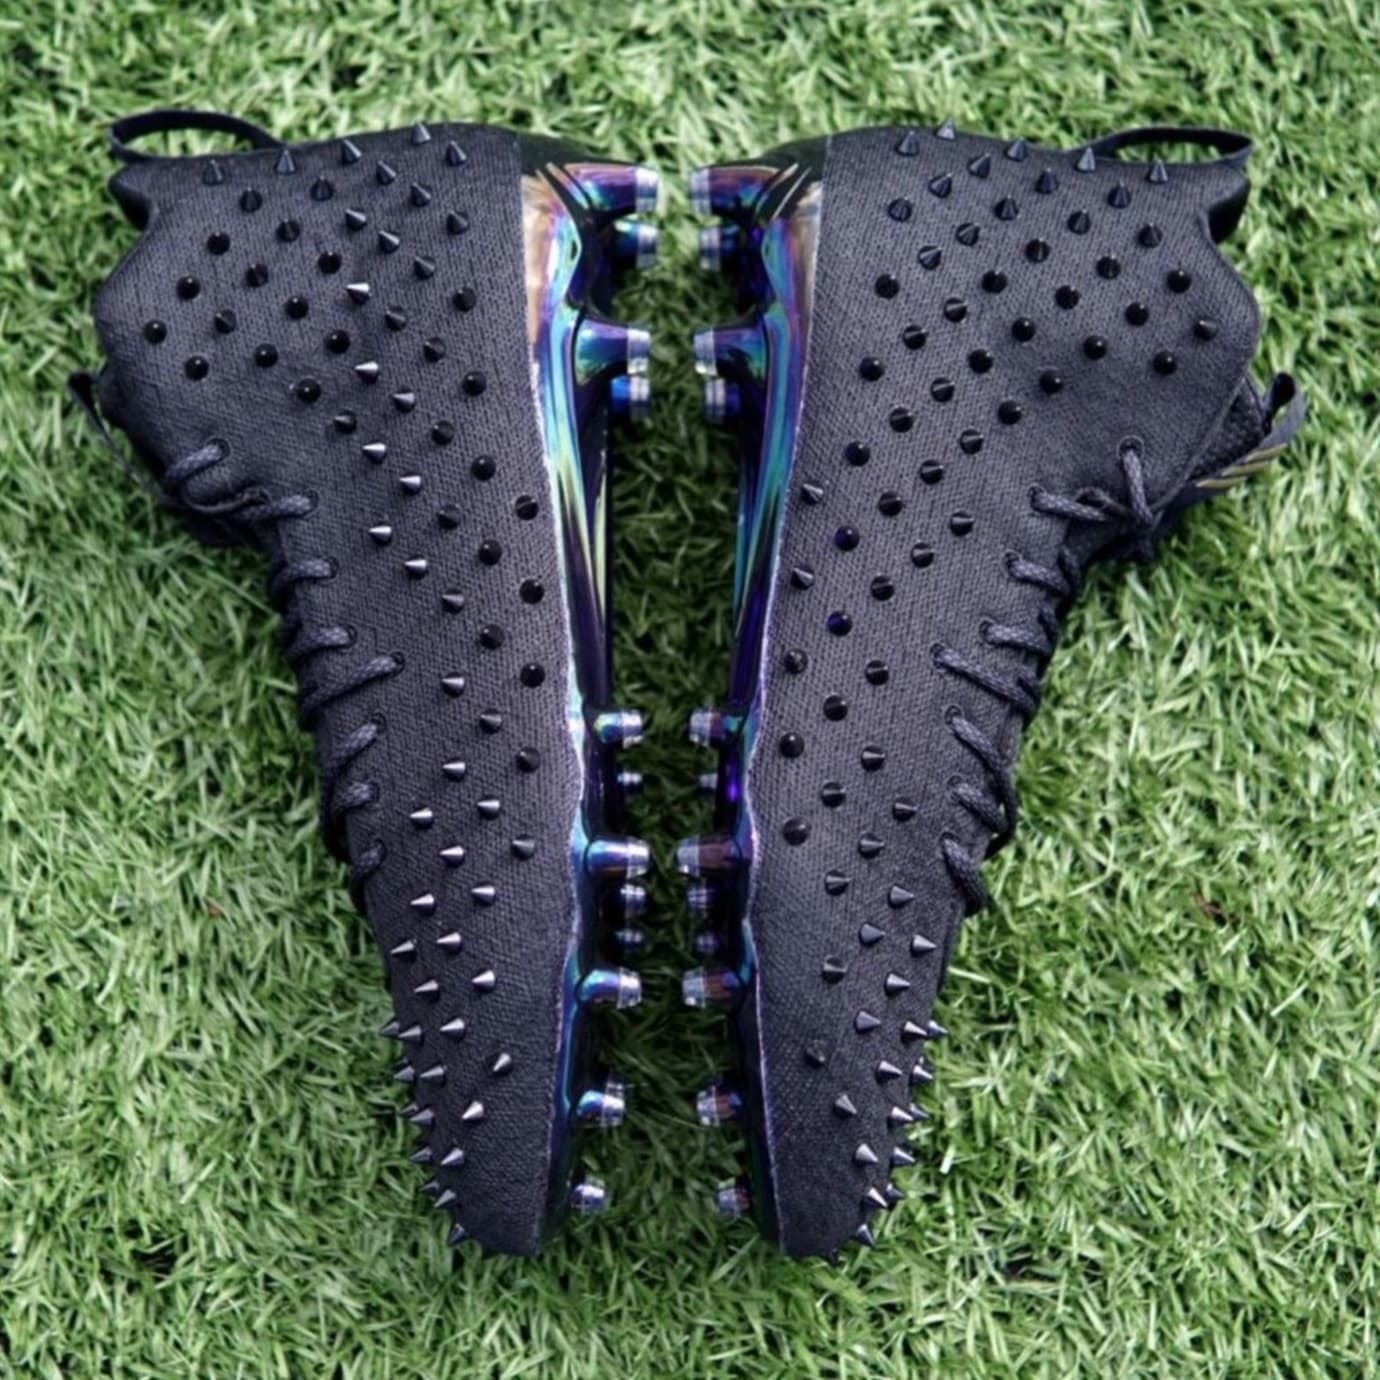 adidas cleats with spikes